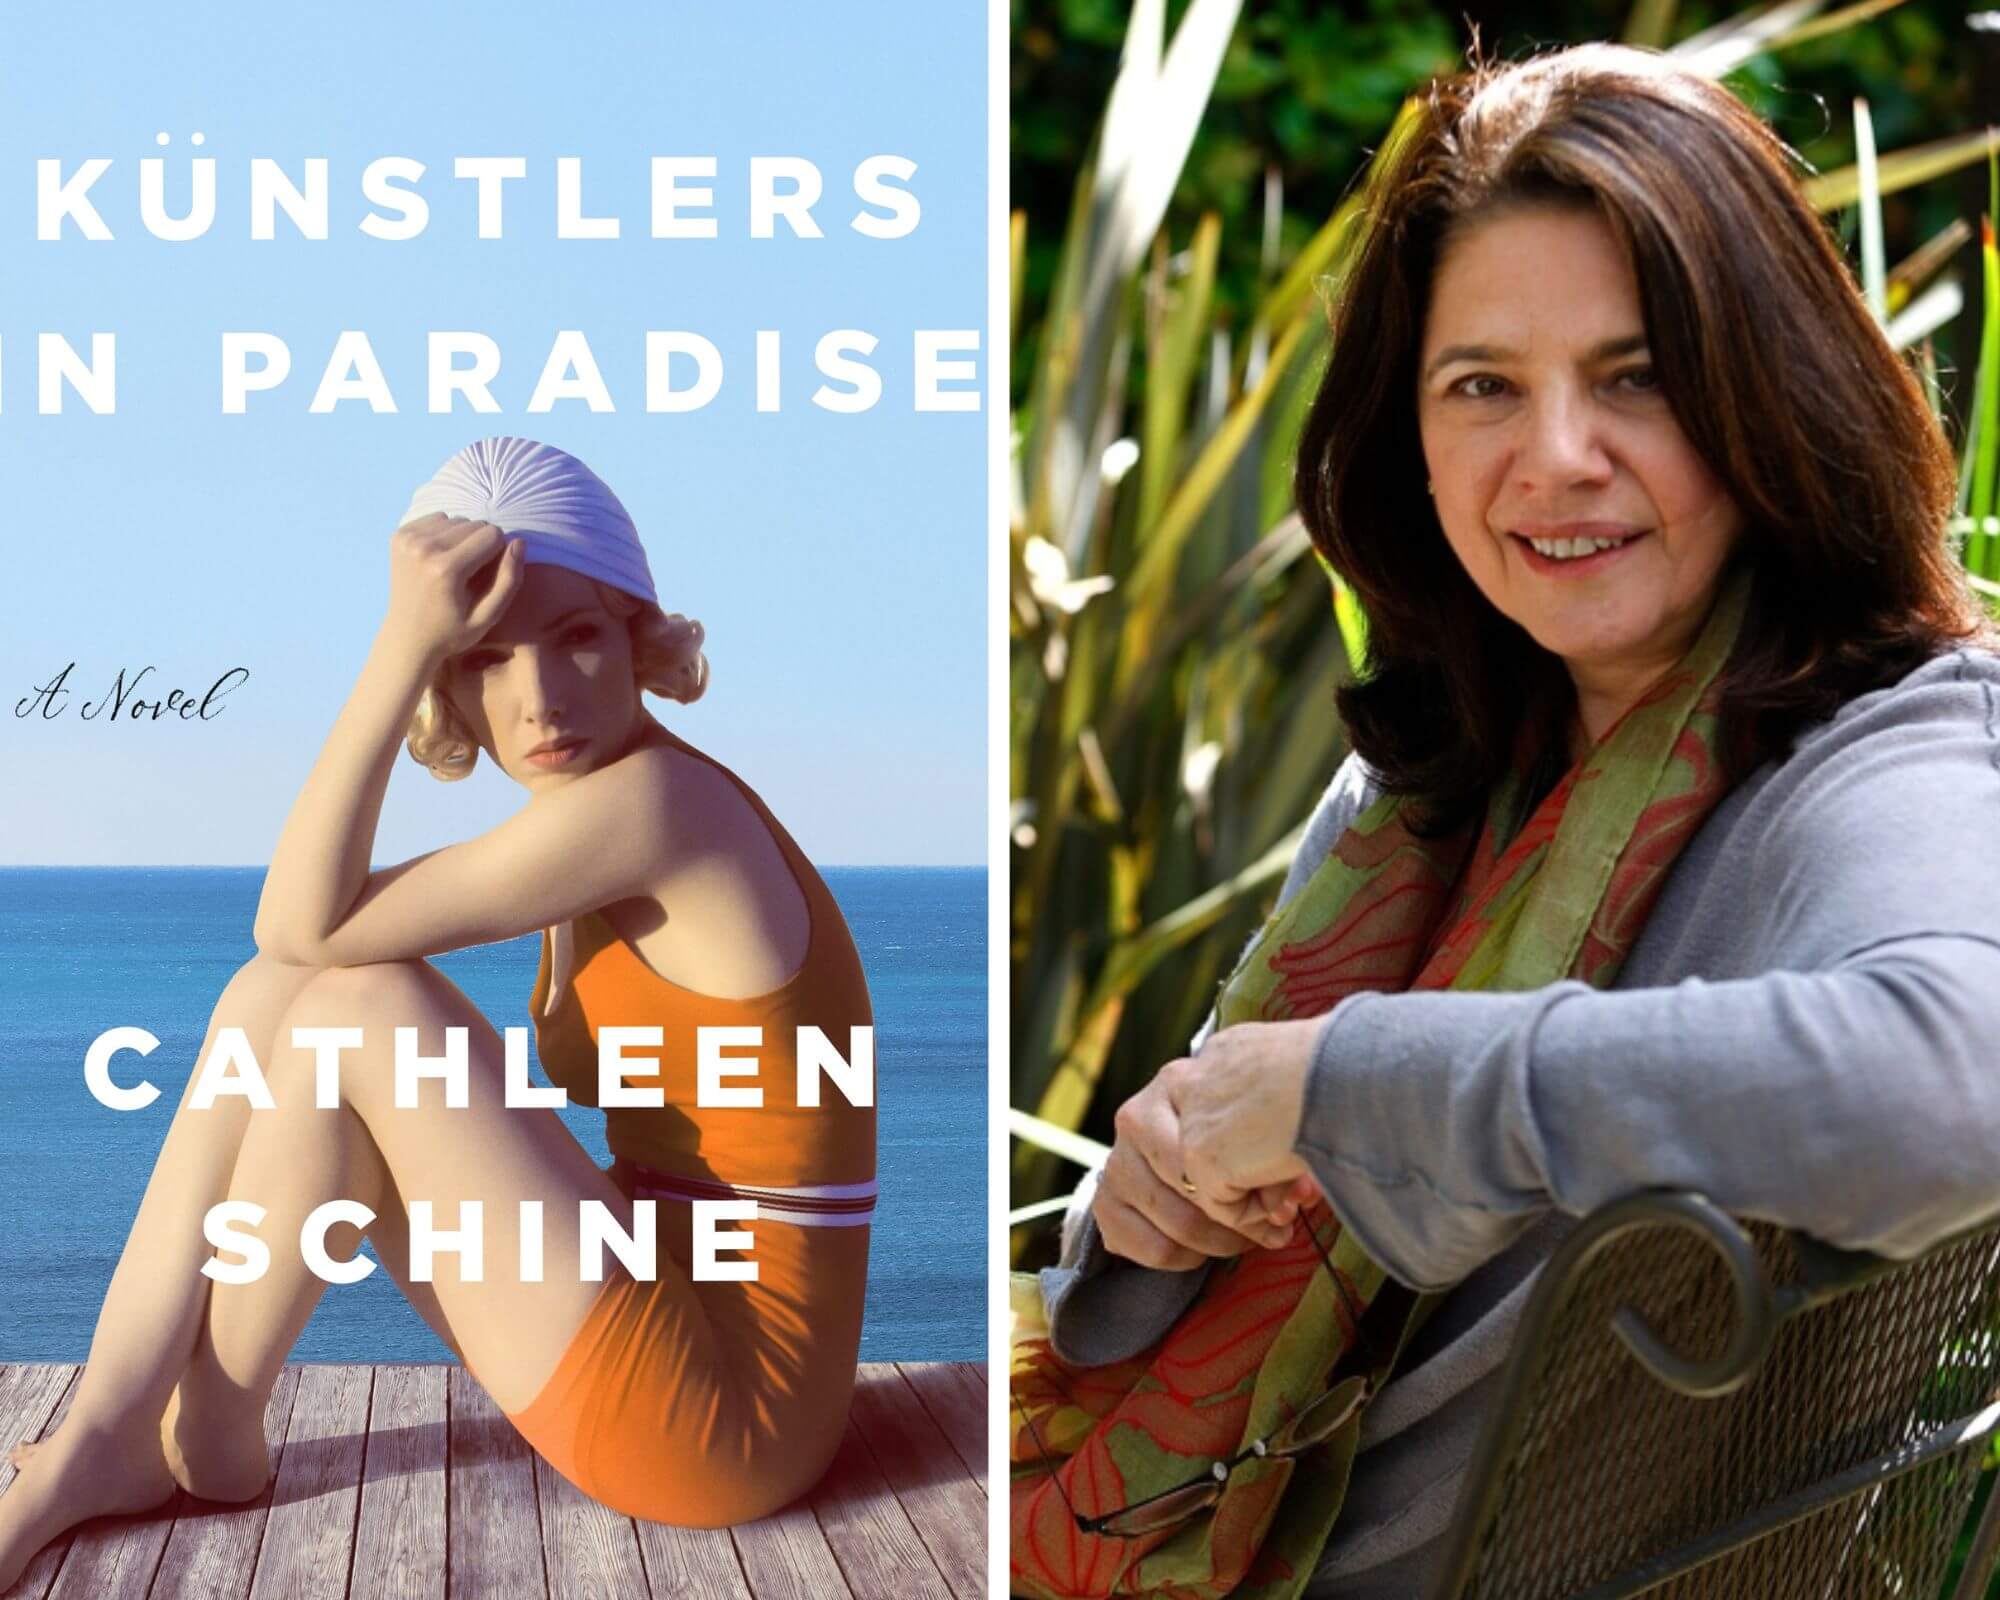 A headshot of the author Cathleen Schine next to a photo of the book cover of 'Künstlers in Paradise.'